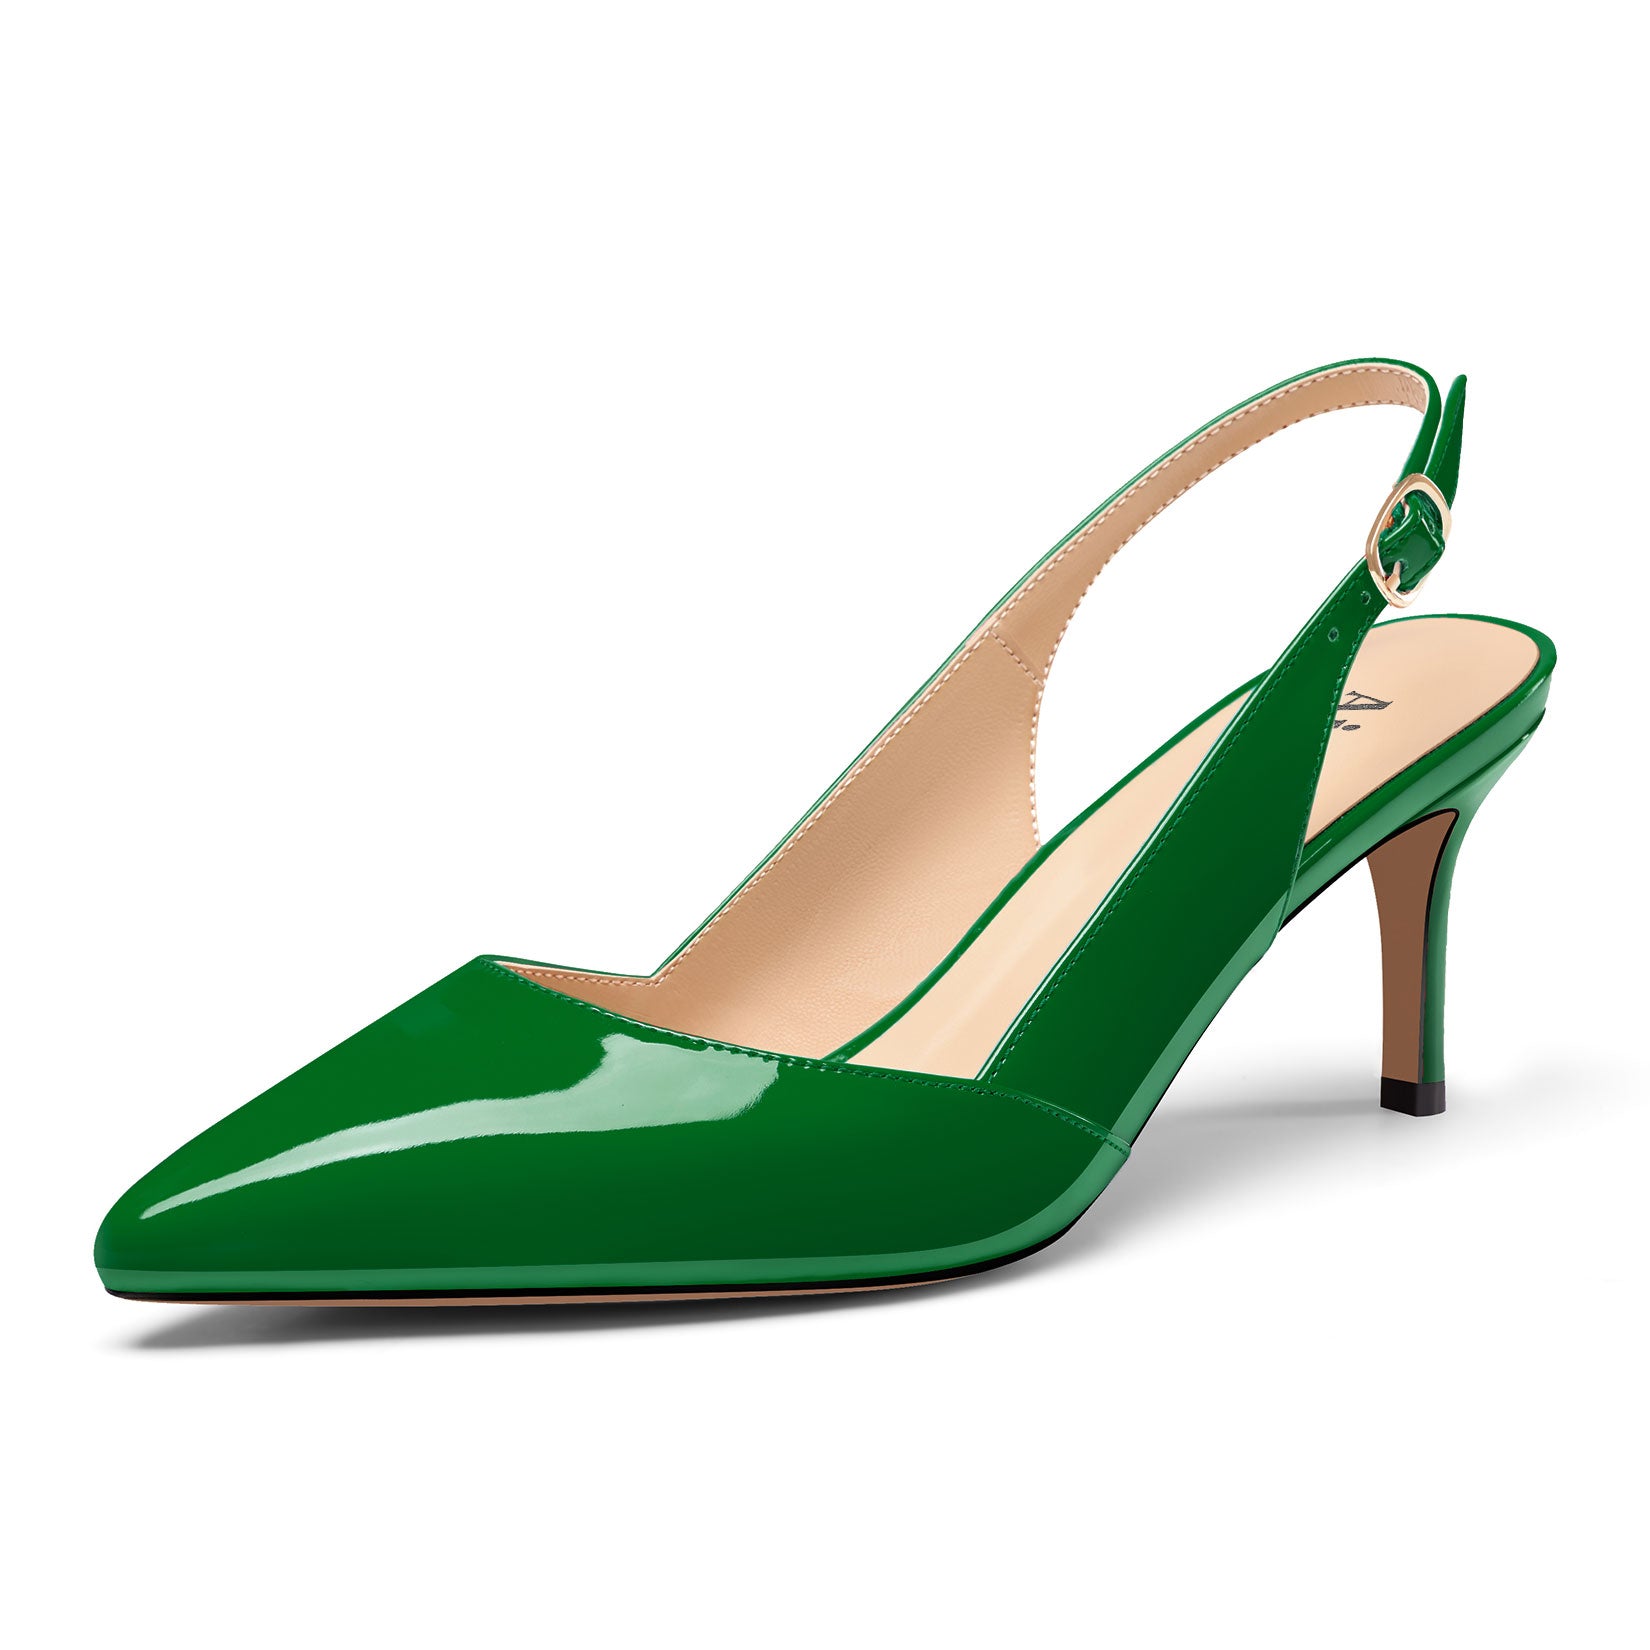 Ladies' Pointed Toe Slingback Pumps 2.3-Inch Heel, Alluringly Sleek with Patent Leather Finish, Fashionably Versatile Shoes